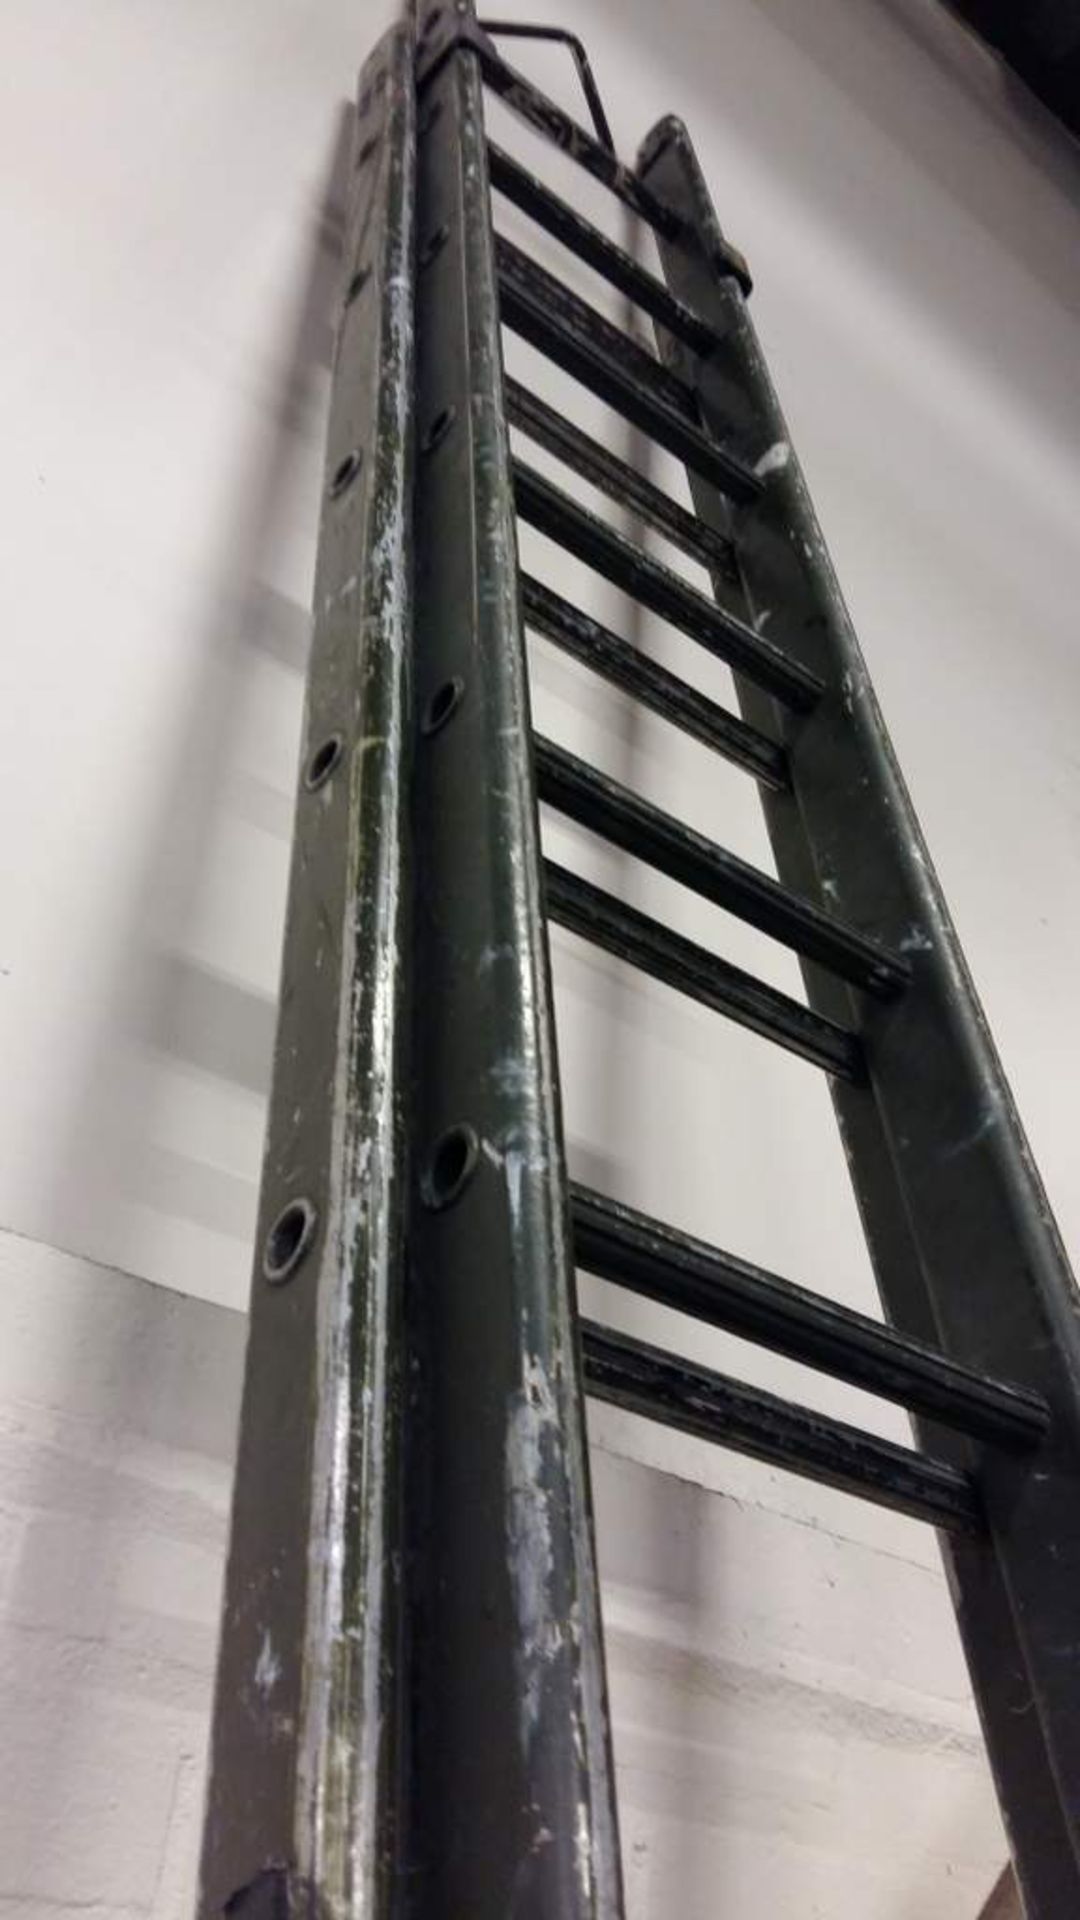 2 section ladder - Image 3 of 3